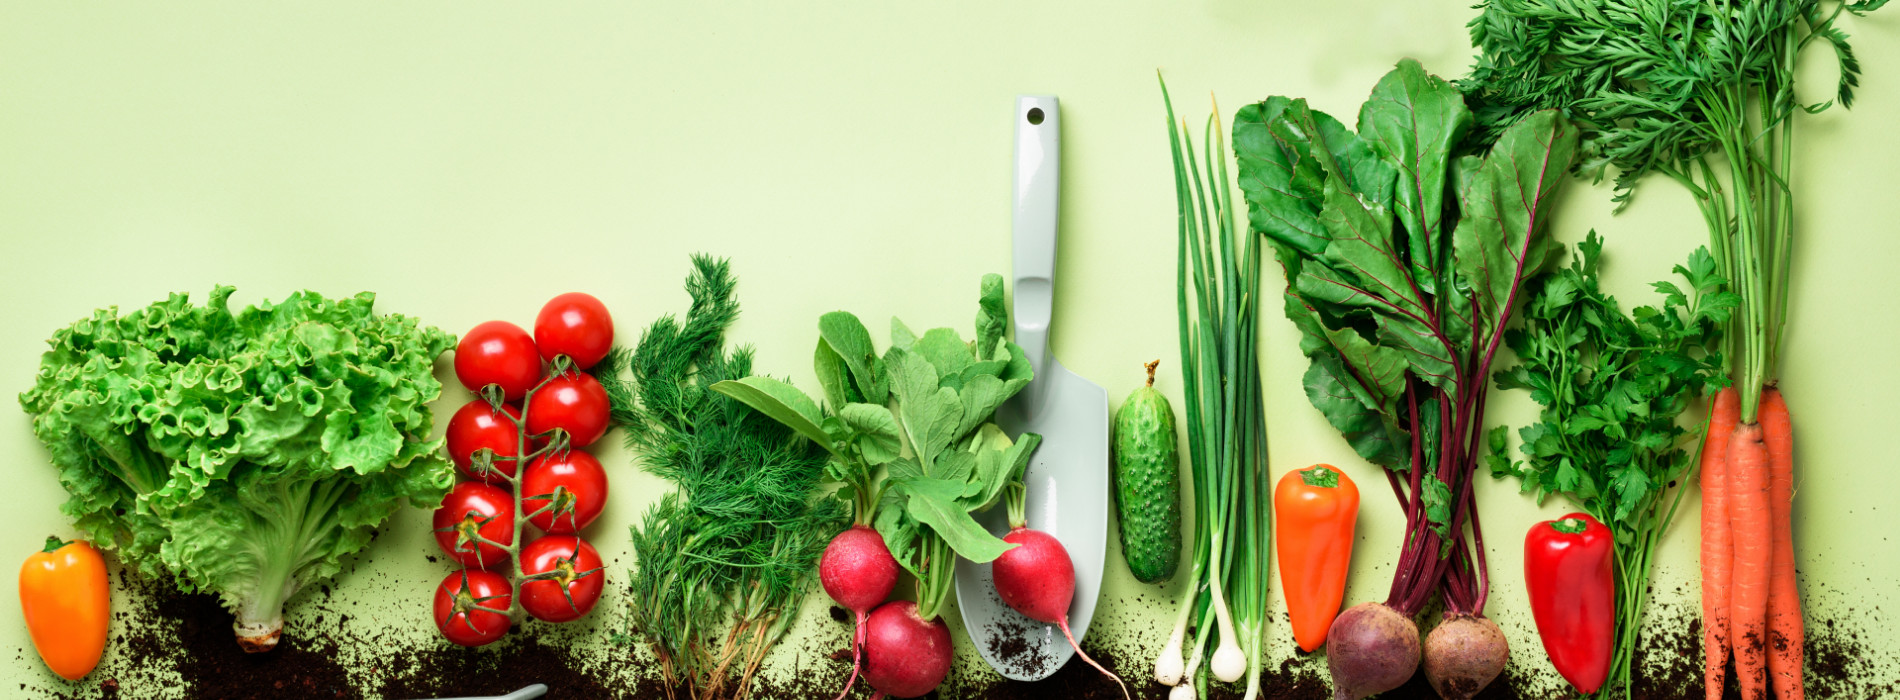 Vegetable on green background